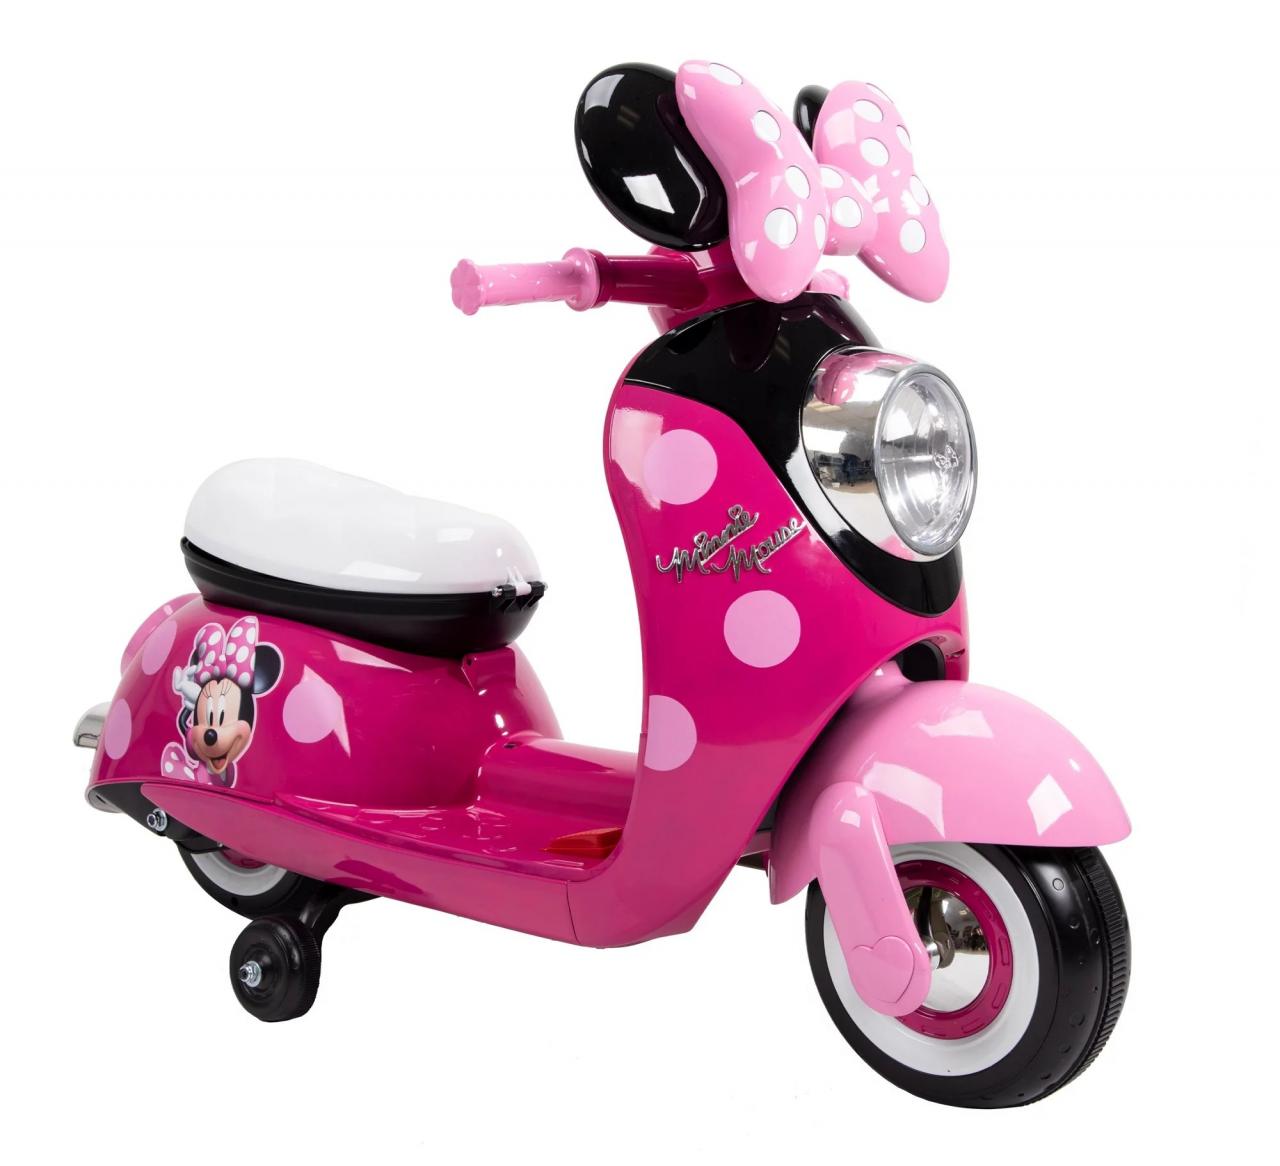 Disney Minnie Mouse 6V Euro Scooter RideOn BatteryPowered Toy by